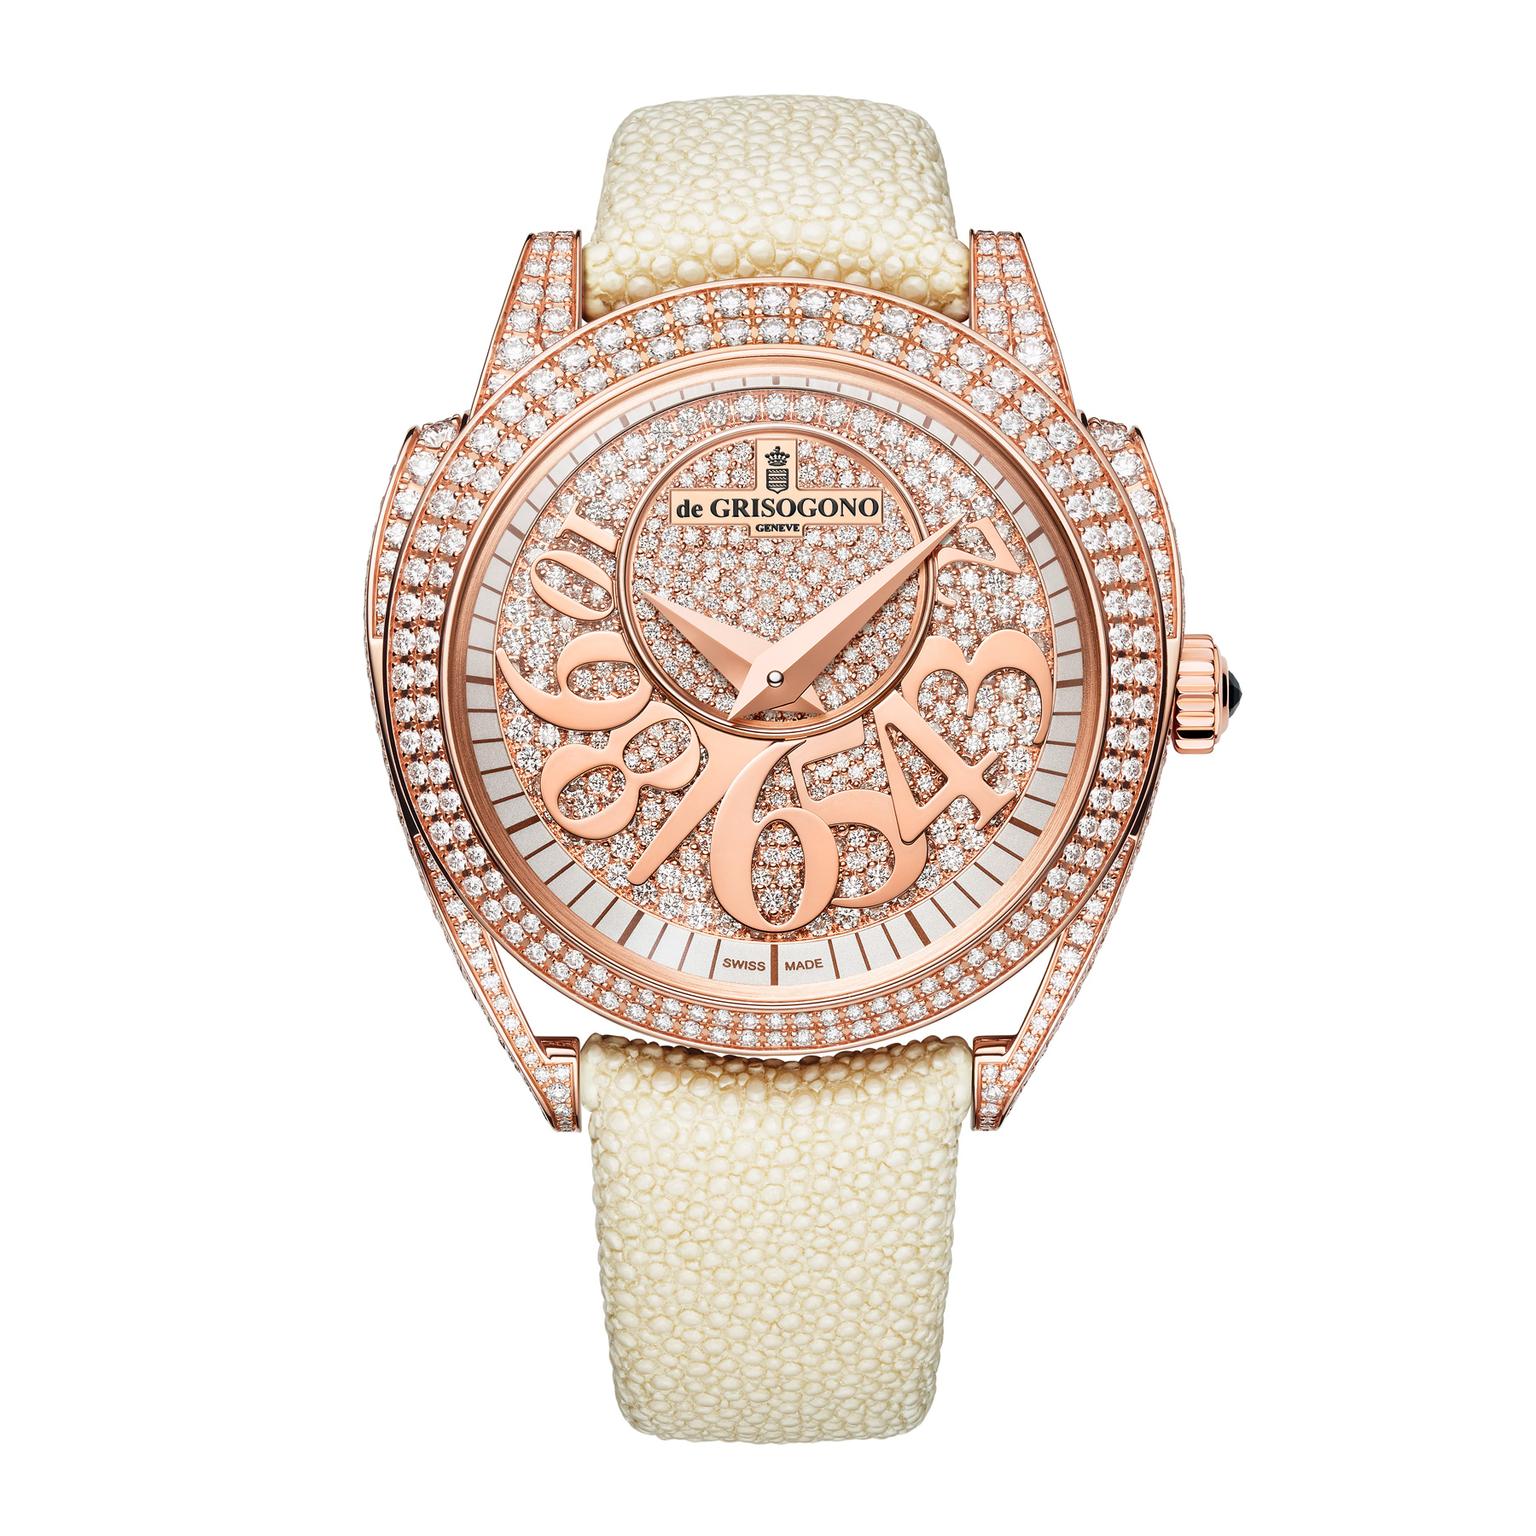 Perfectly precious high jewellery watches